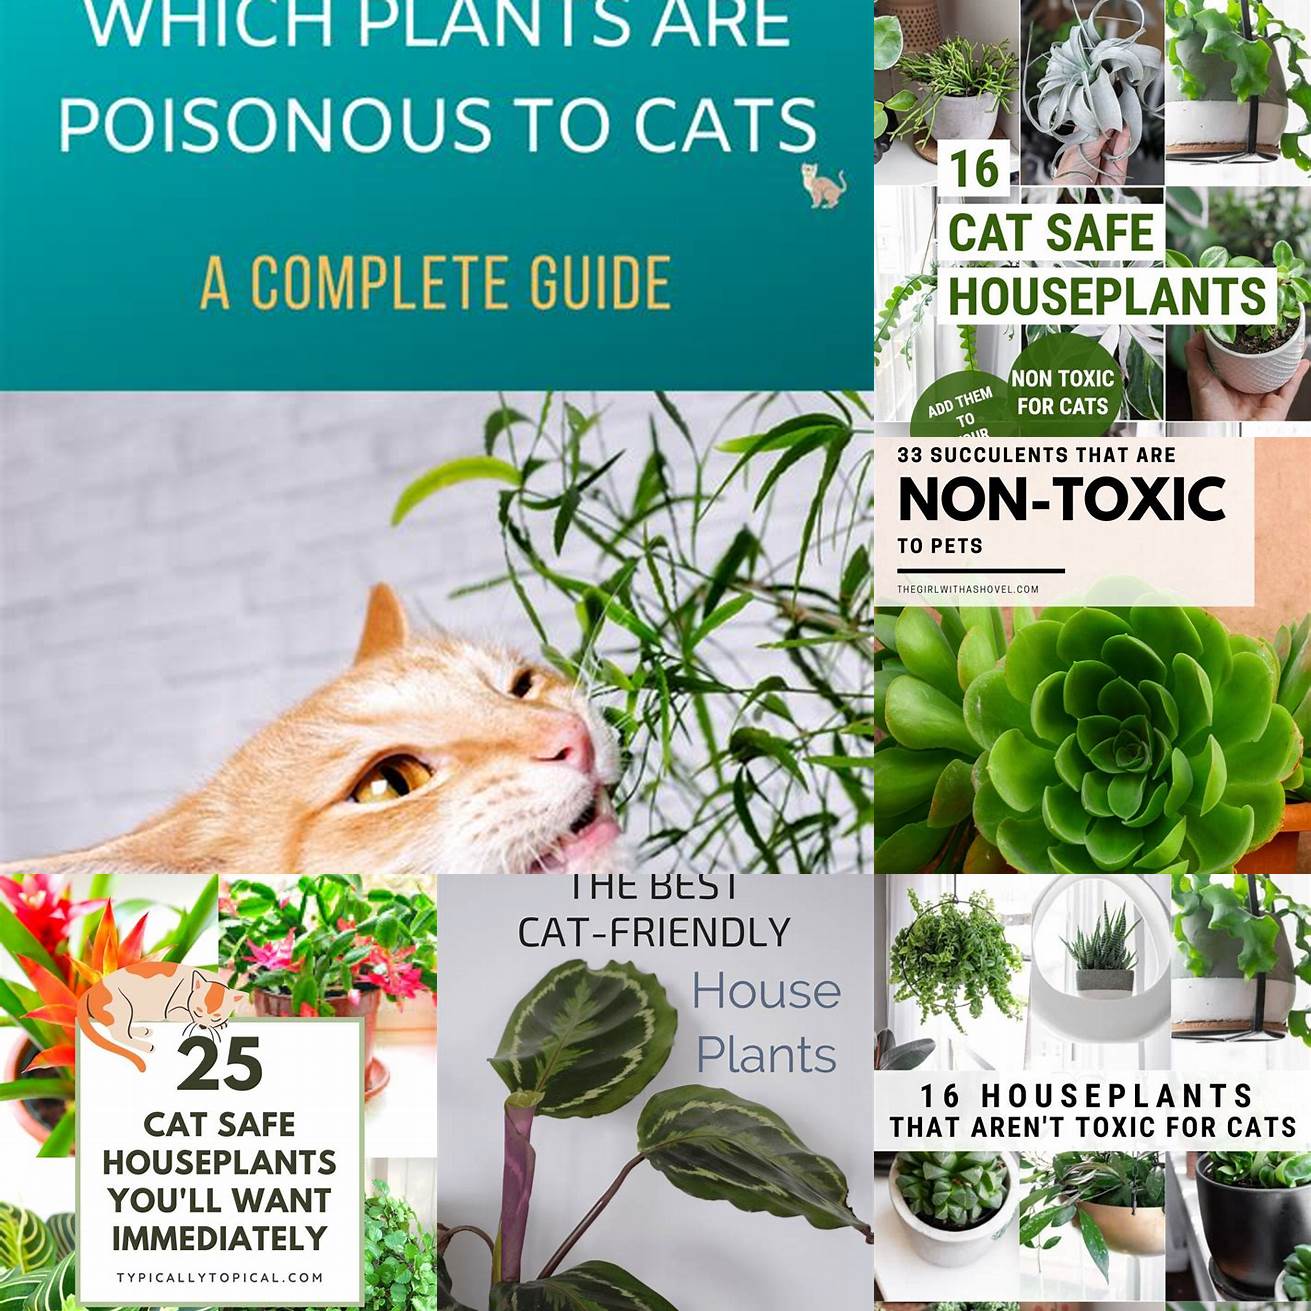 Q How can I keep my cat safe from toxic plants